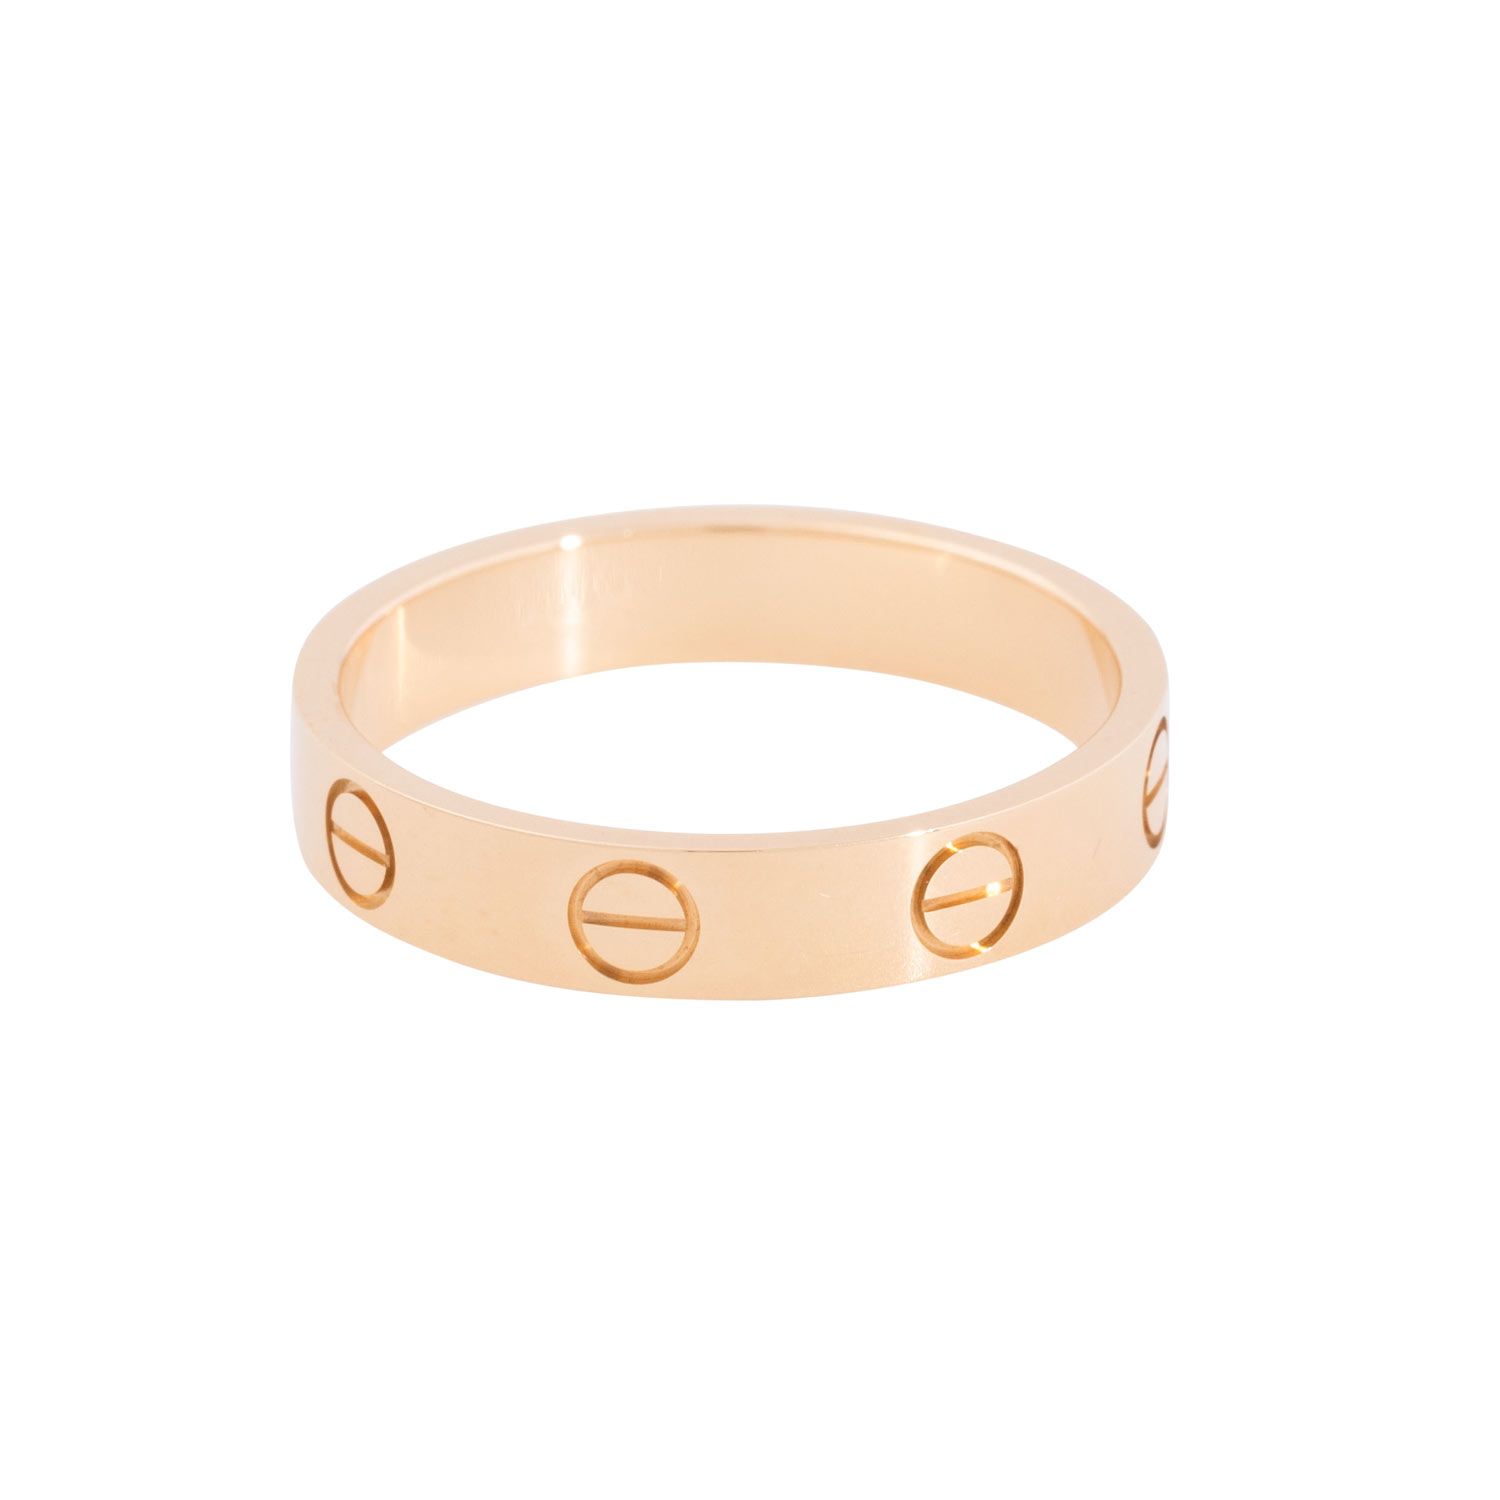 CARTIER Ring "Love", - Image 3 of 4